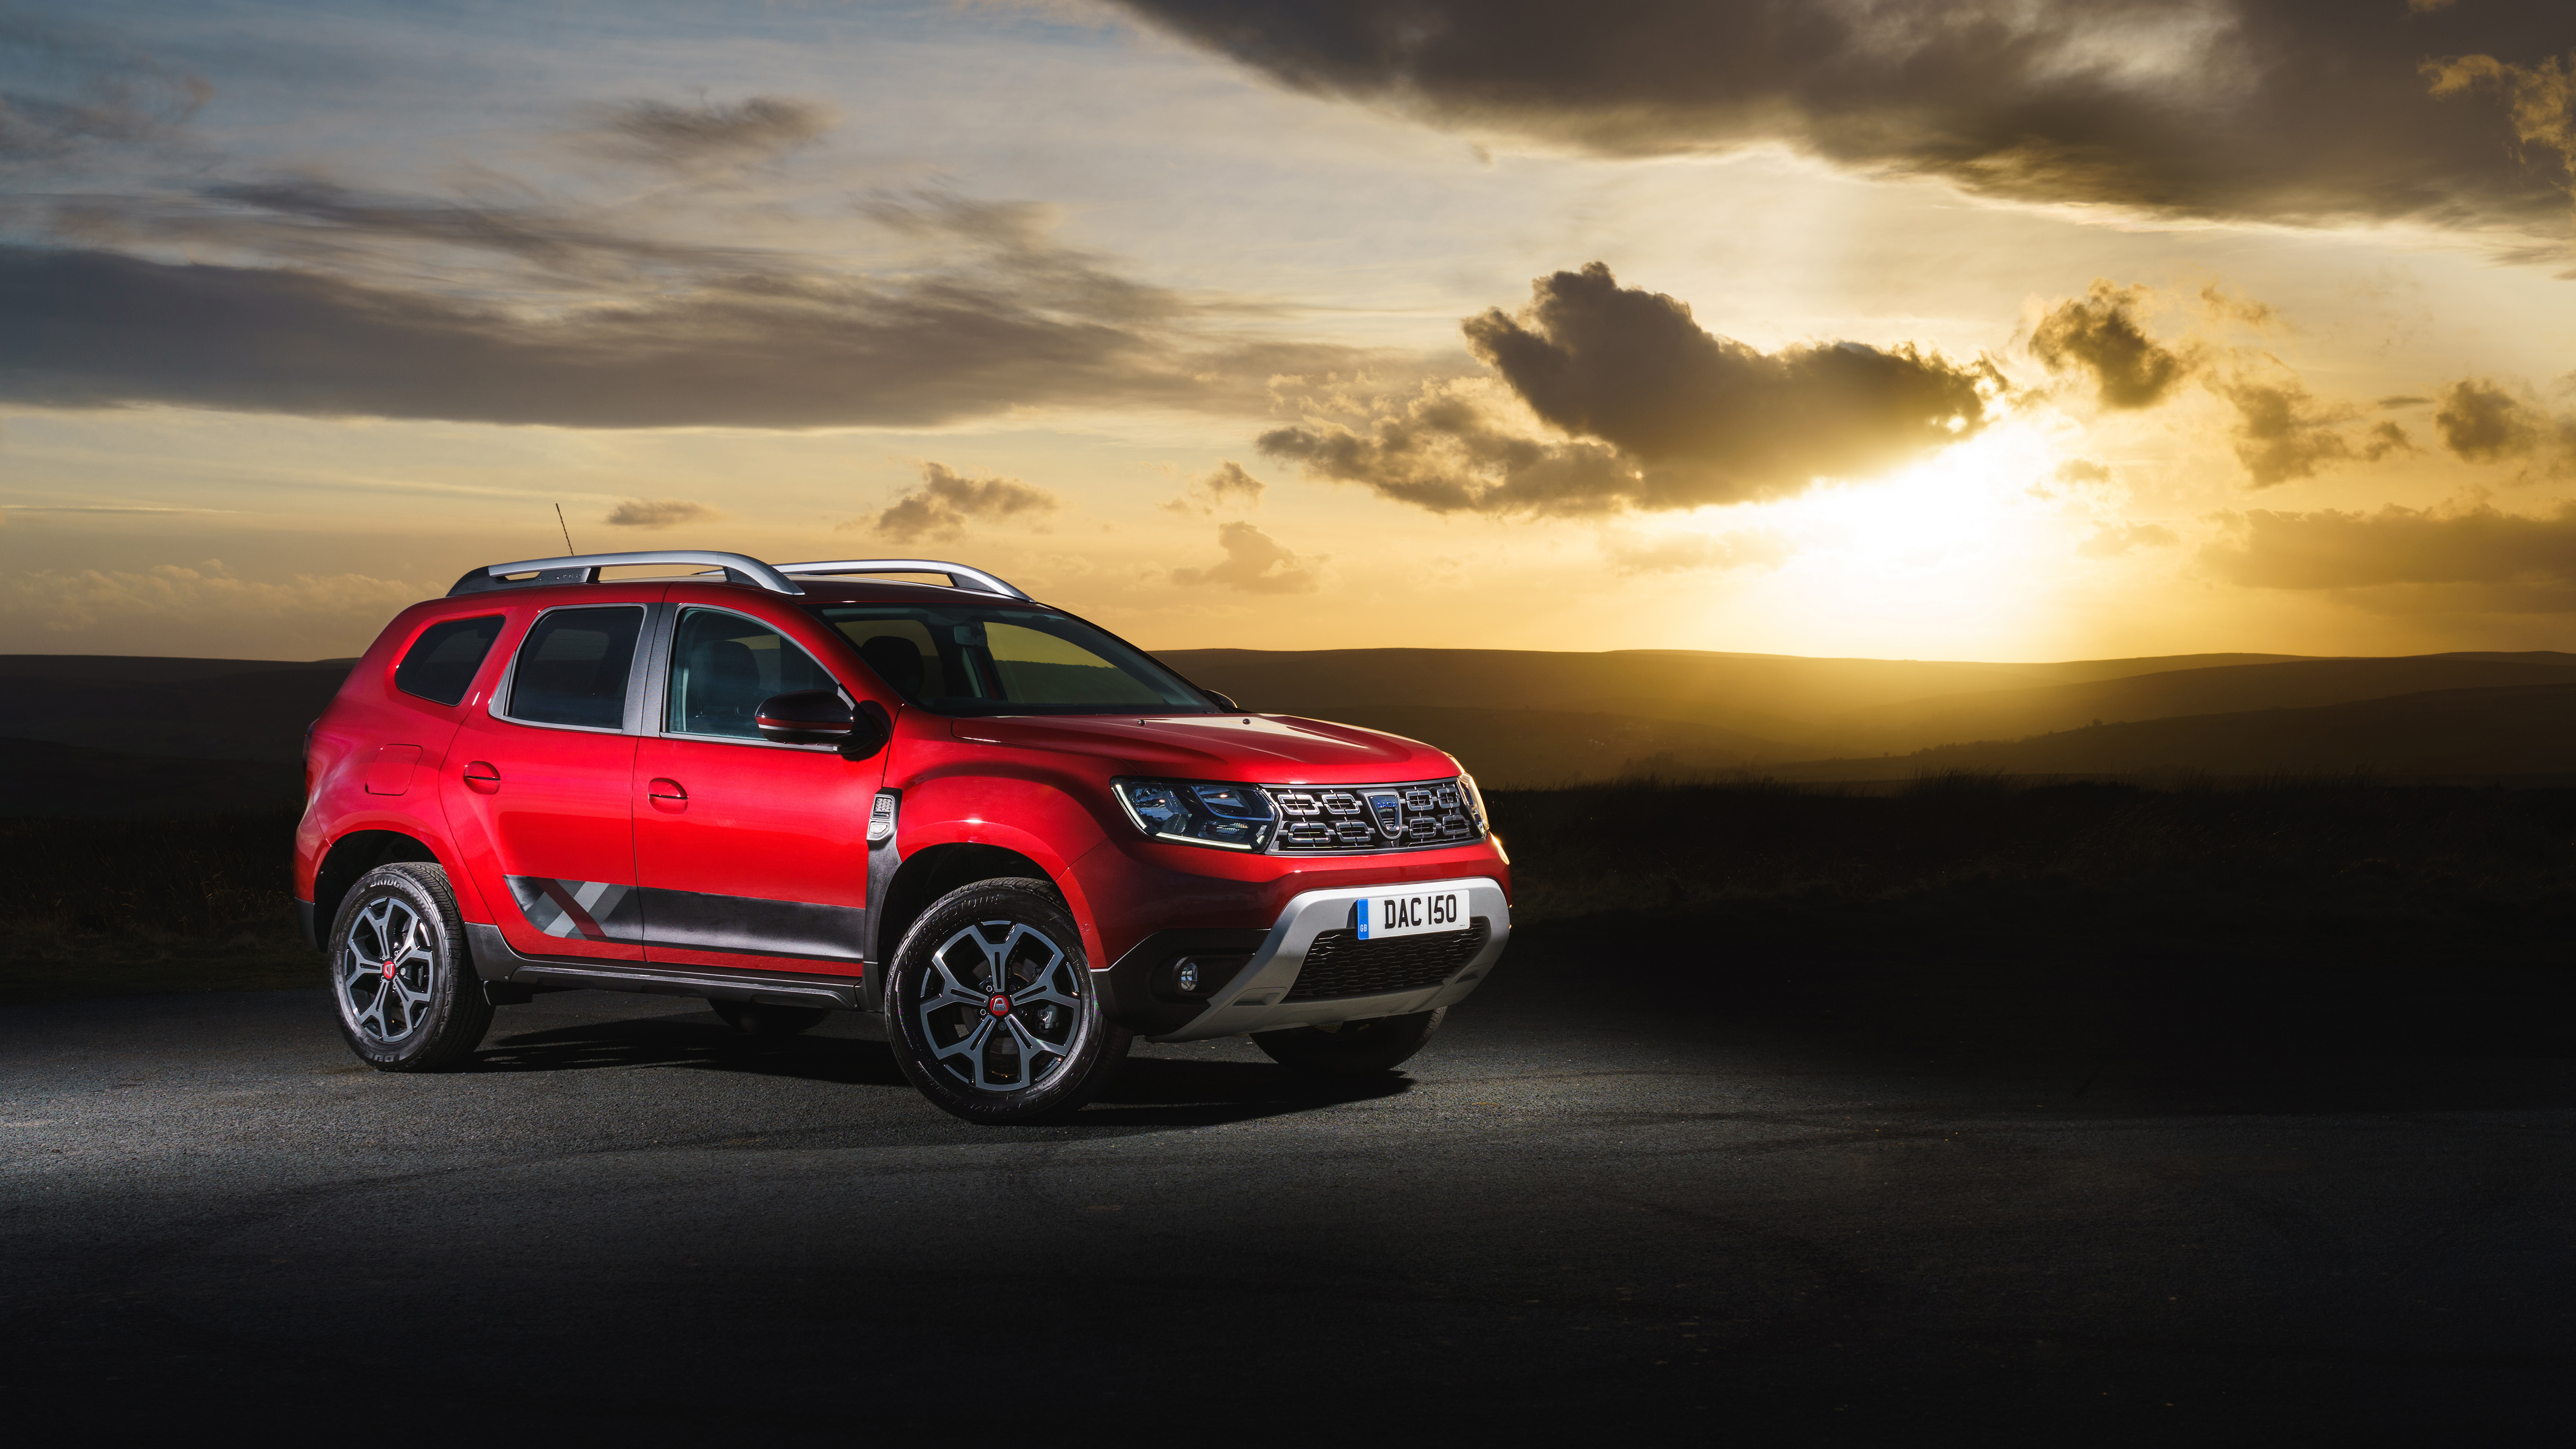 2021 Dacia Duster Wallpaper and Image Gallery